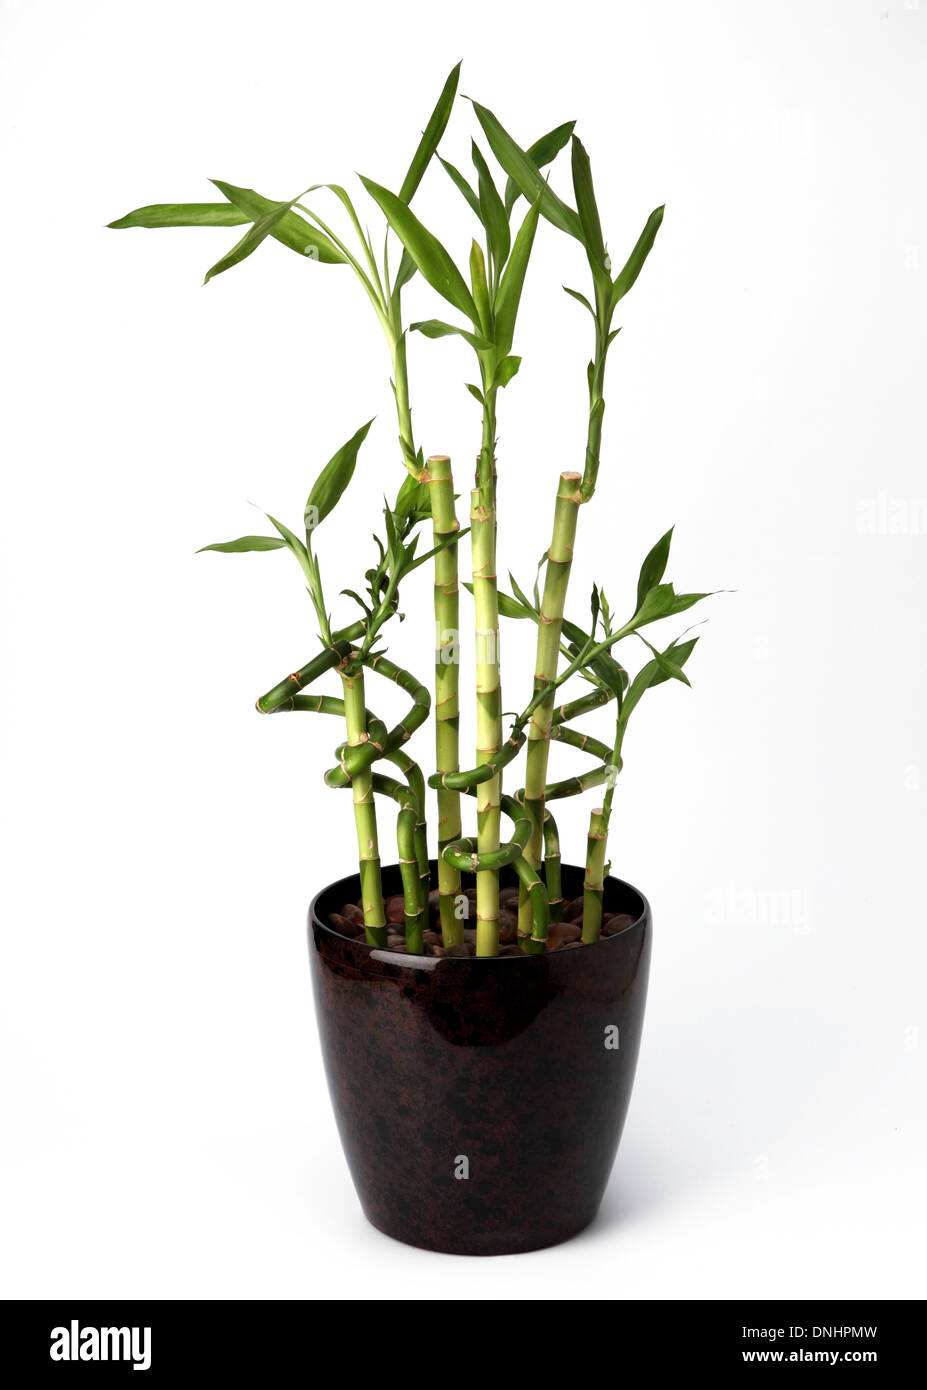 A bamboo plant in a container on a white background Stock Photo